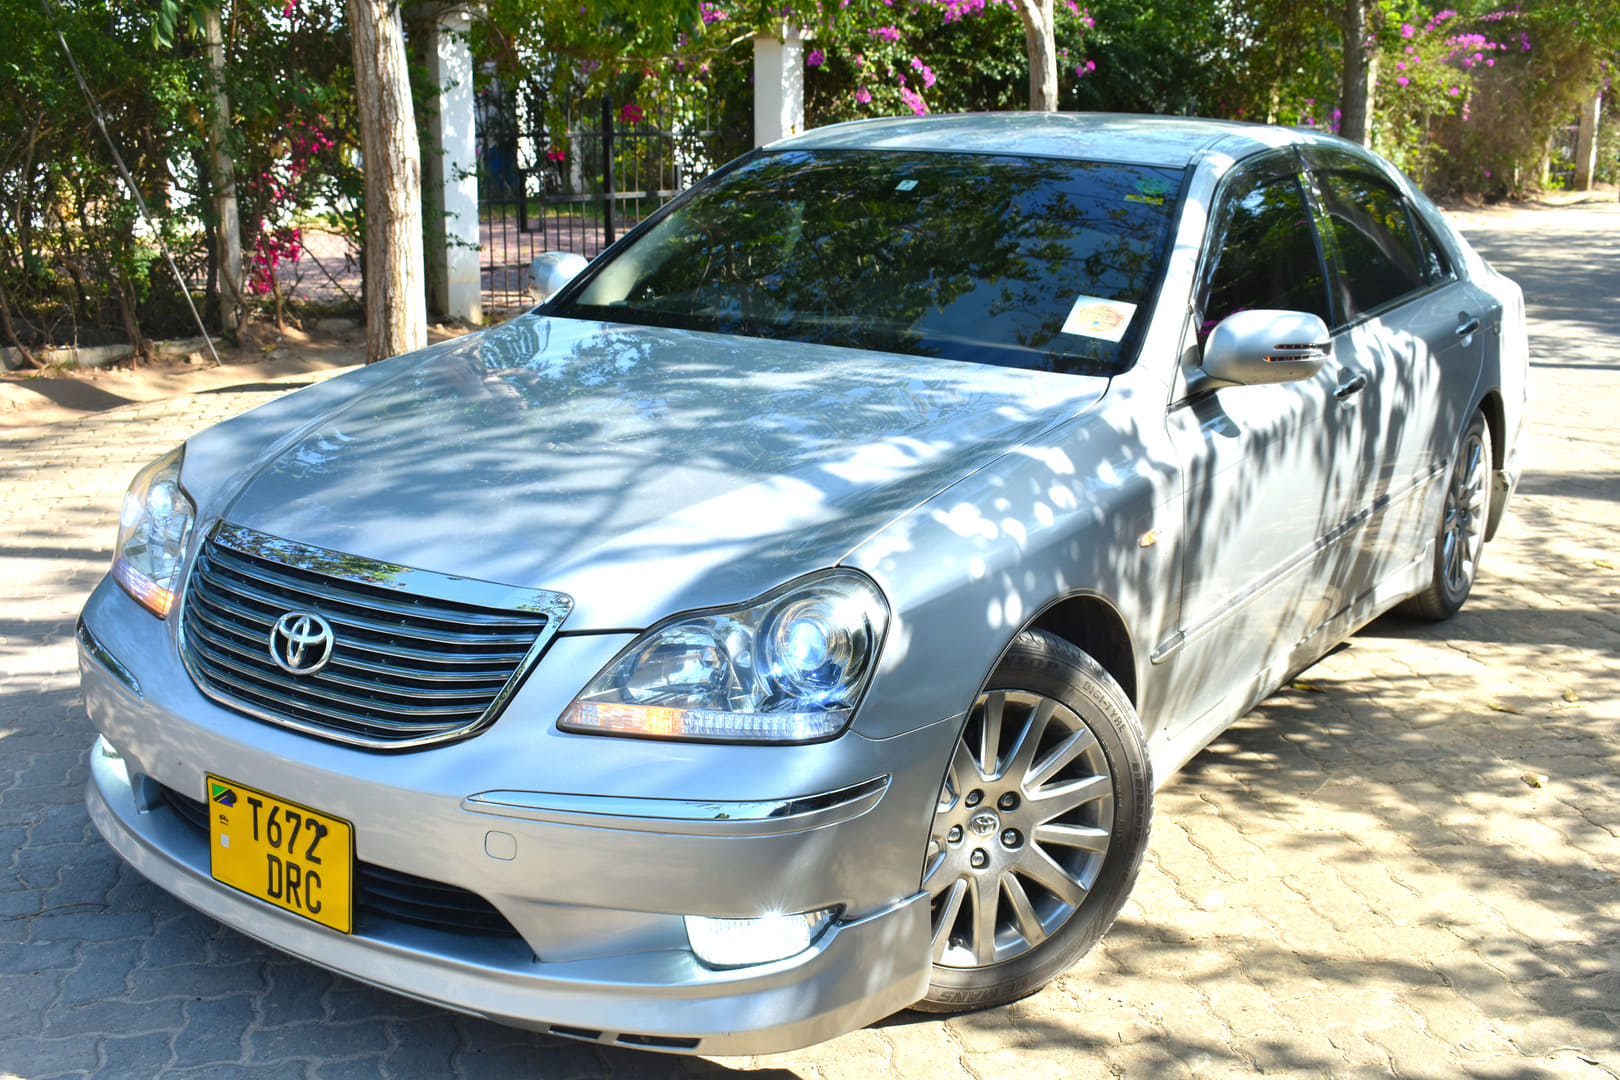 TOYOTA CROWN MAJESTA Reviews and Ratings - BE FORWARD